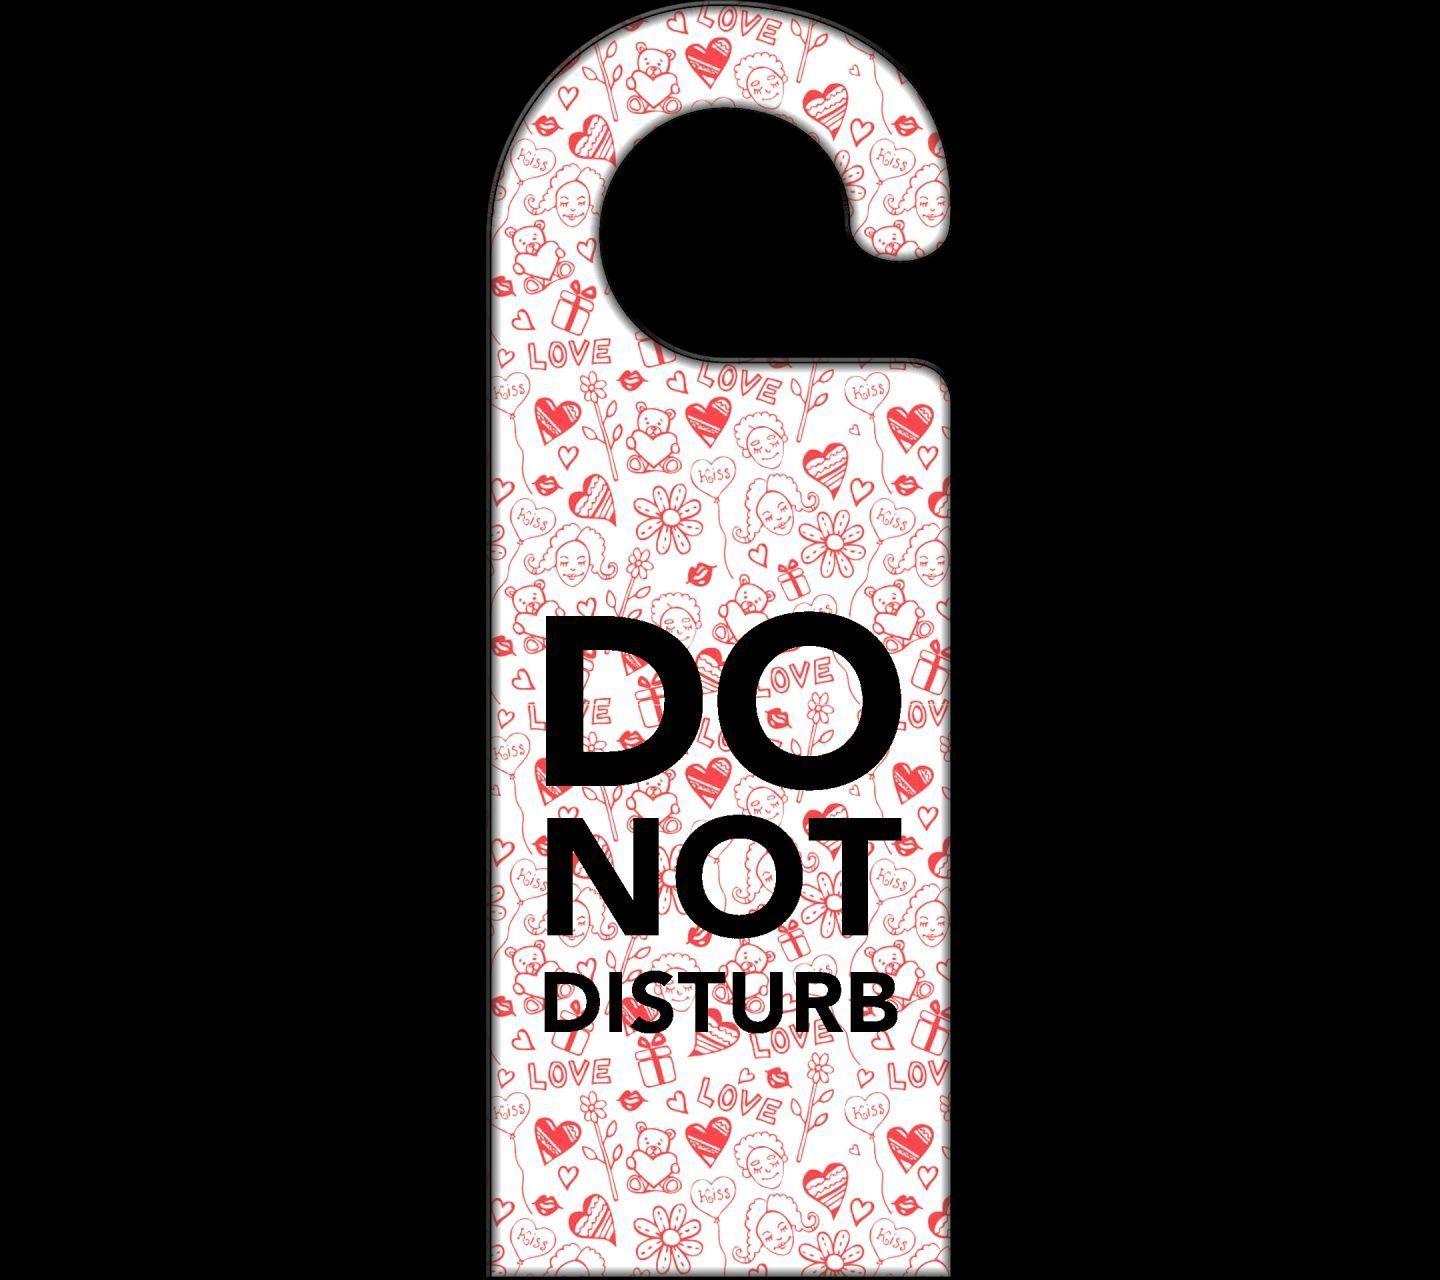 Quickly Turn on Do Not Disturb in iOS 12 Until You Change Locations   iOS 12 enhan  Do not disturb wallpaper iphone Dont disturb me wallpaper  Disturbing